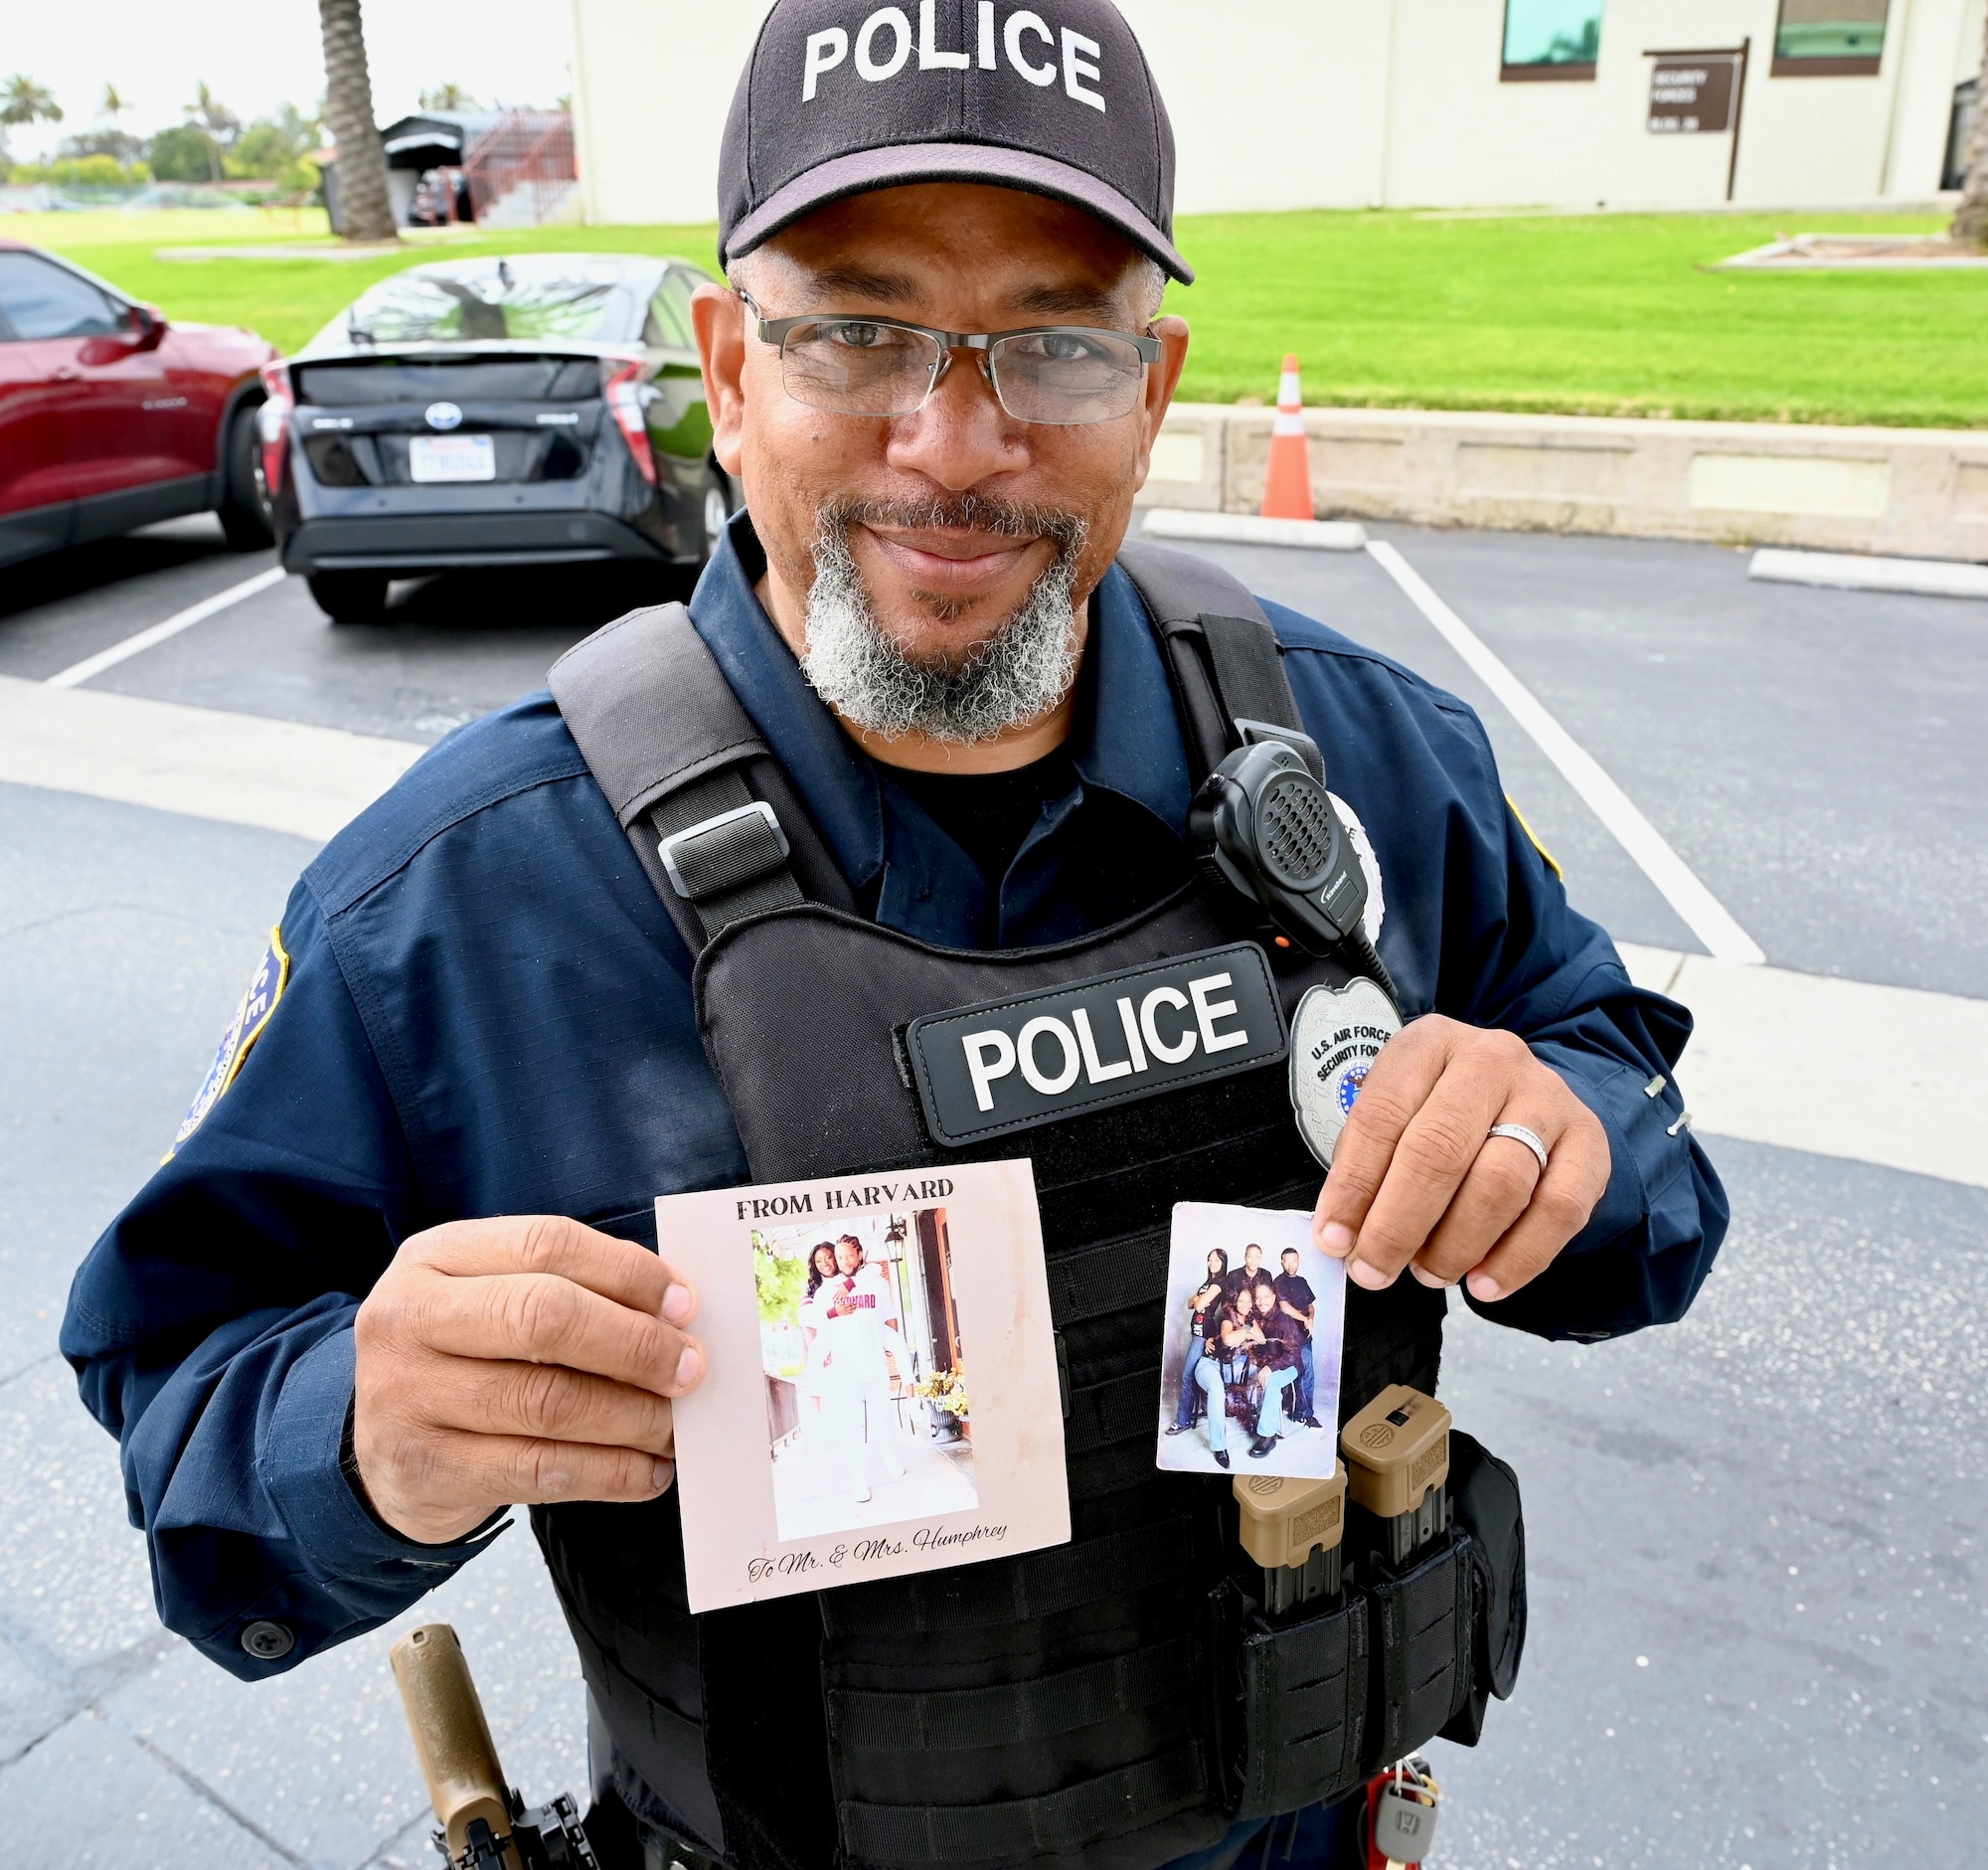 Officer Humphrey proudly holds up photos of his family that he keeps in his vehicle.